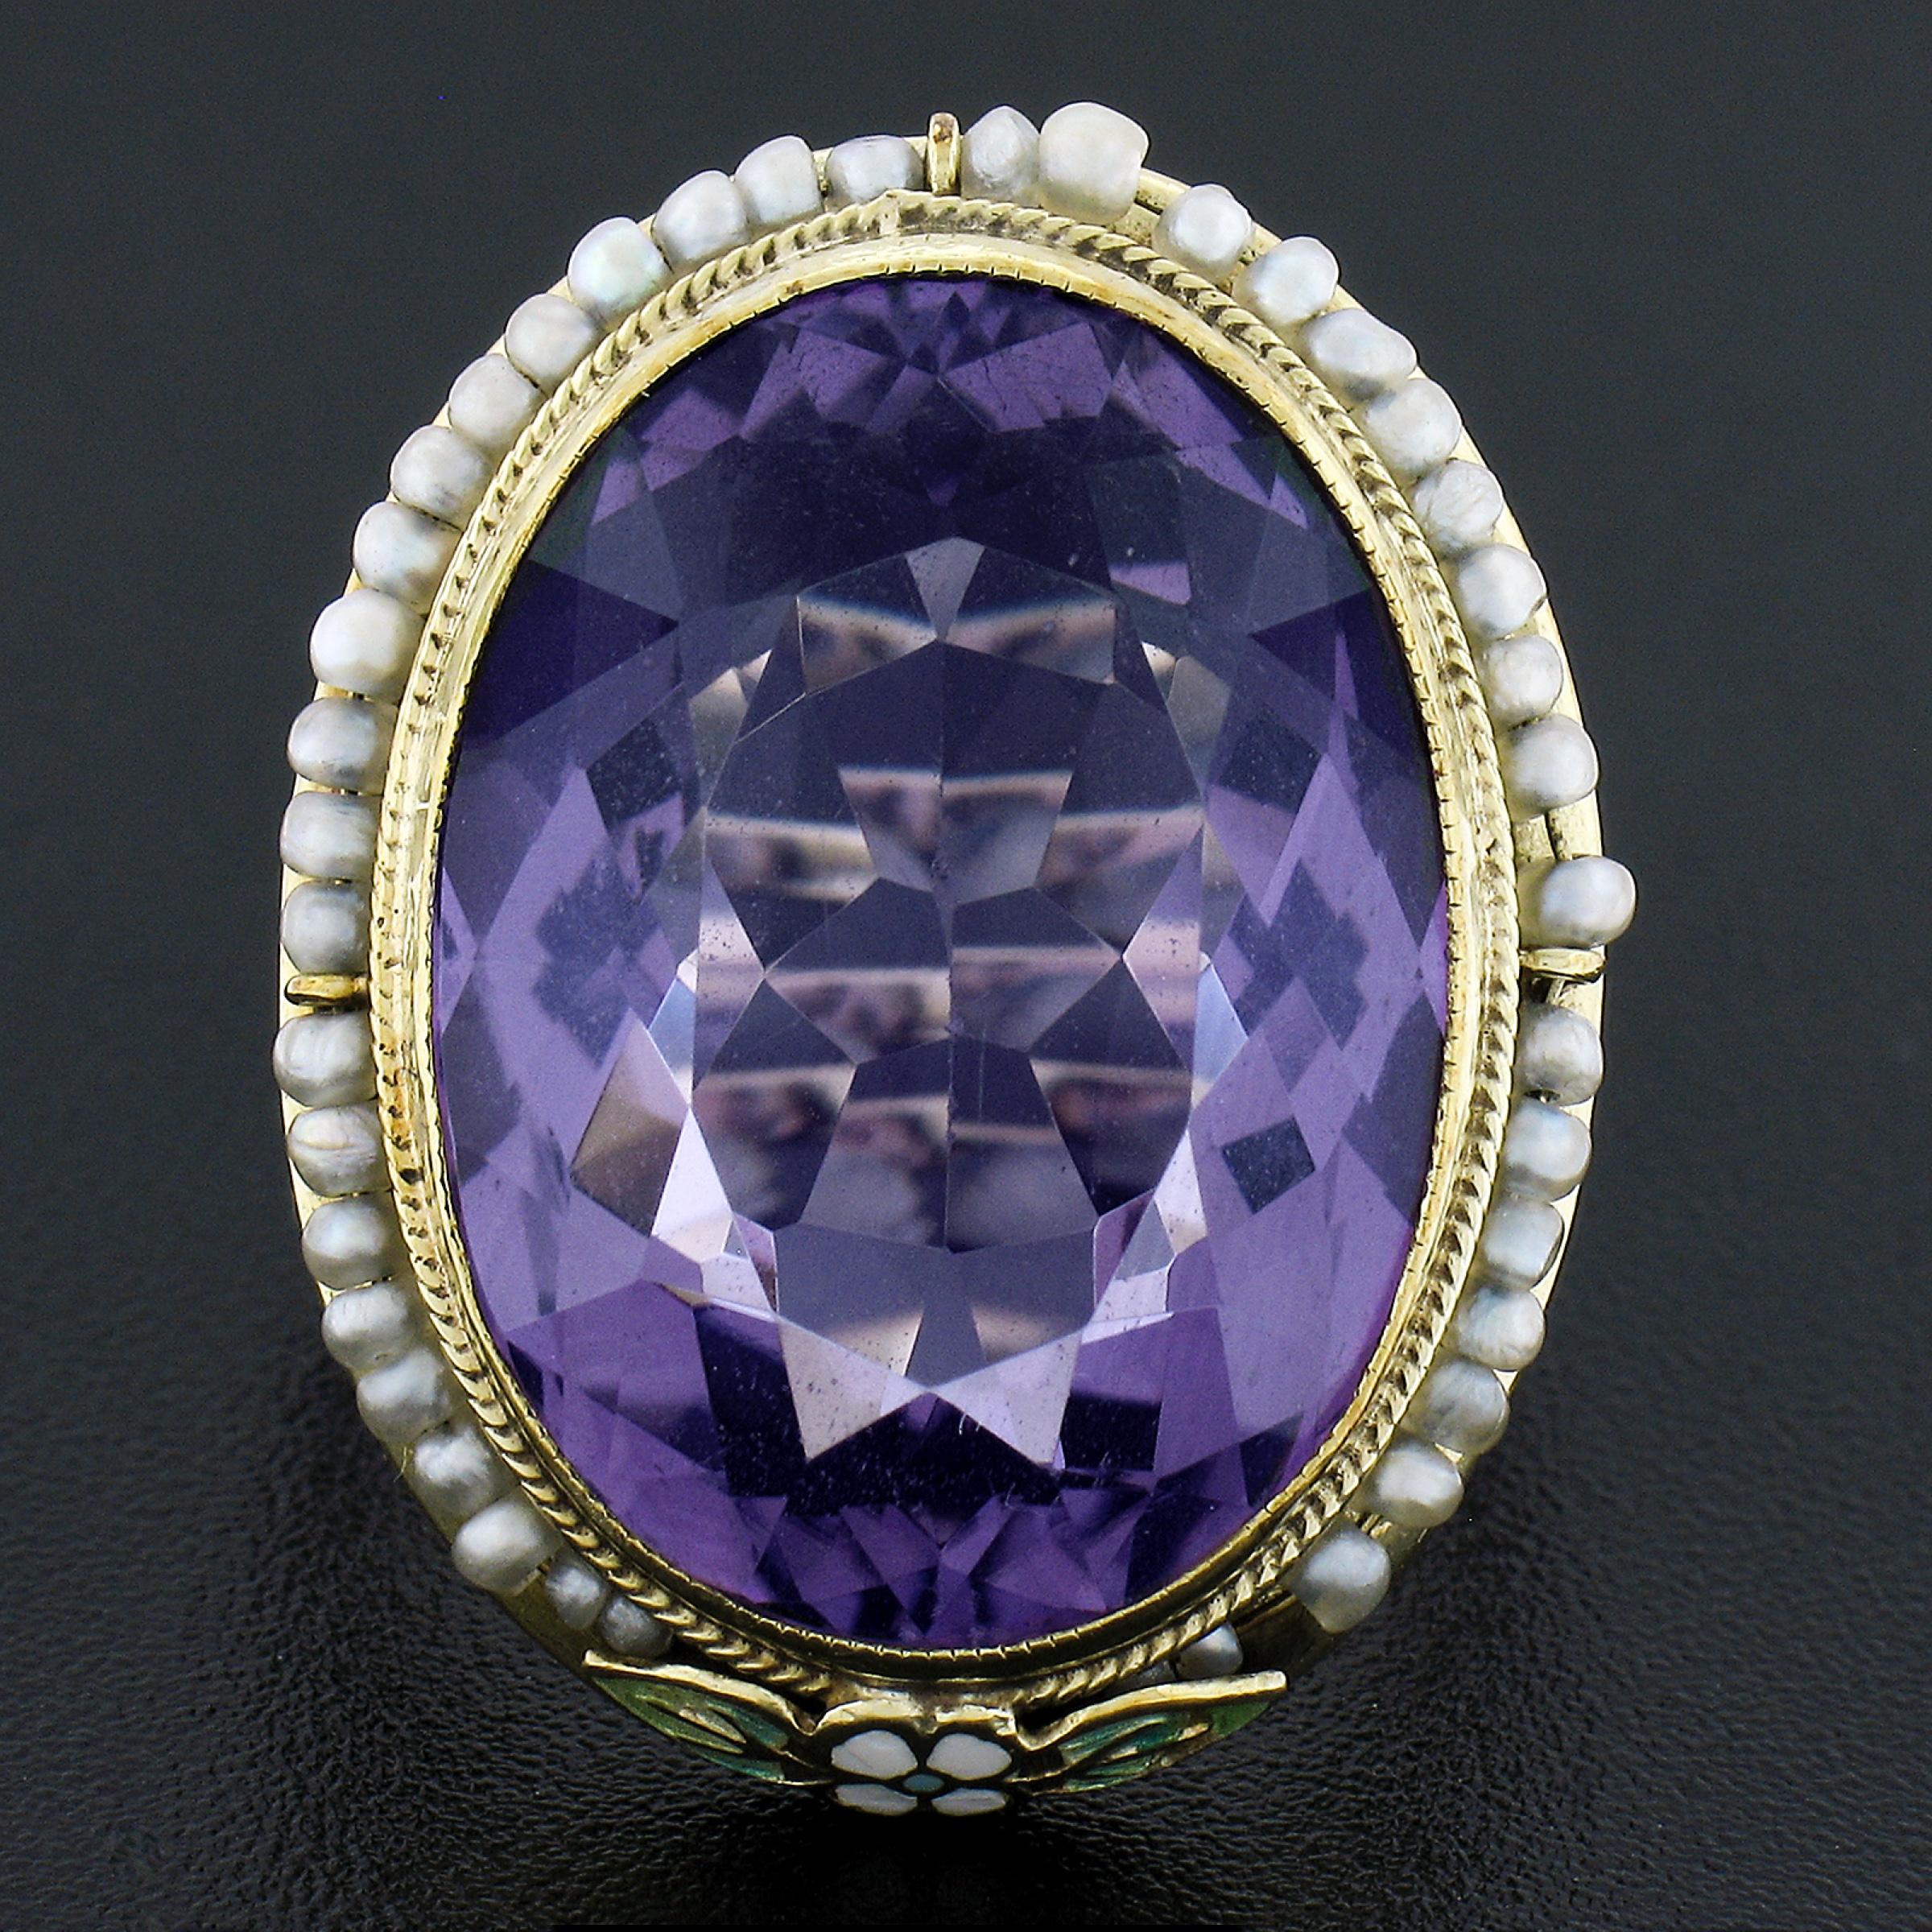 --Stone(s):--
(1) Natural Genuine Amethyst - Oval Brilliant Cut - Bezel Set - Transparent Medium Purple Color - 20x15mm 
Numerous  Genuine Cultured Seed Pearls - Round Shape - Wire Set - White Color 

Material: Solid 14k Yellow Gold
Weight: 9.97